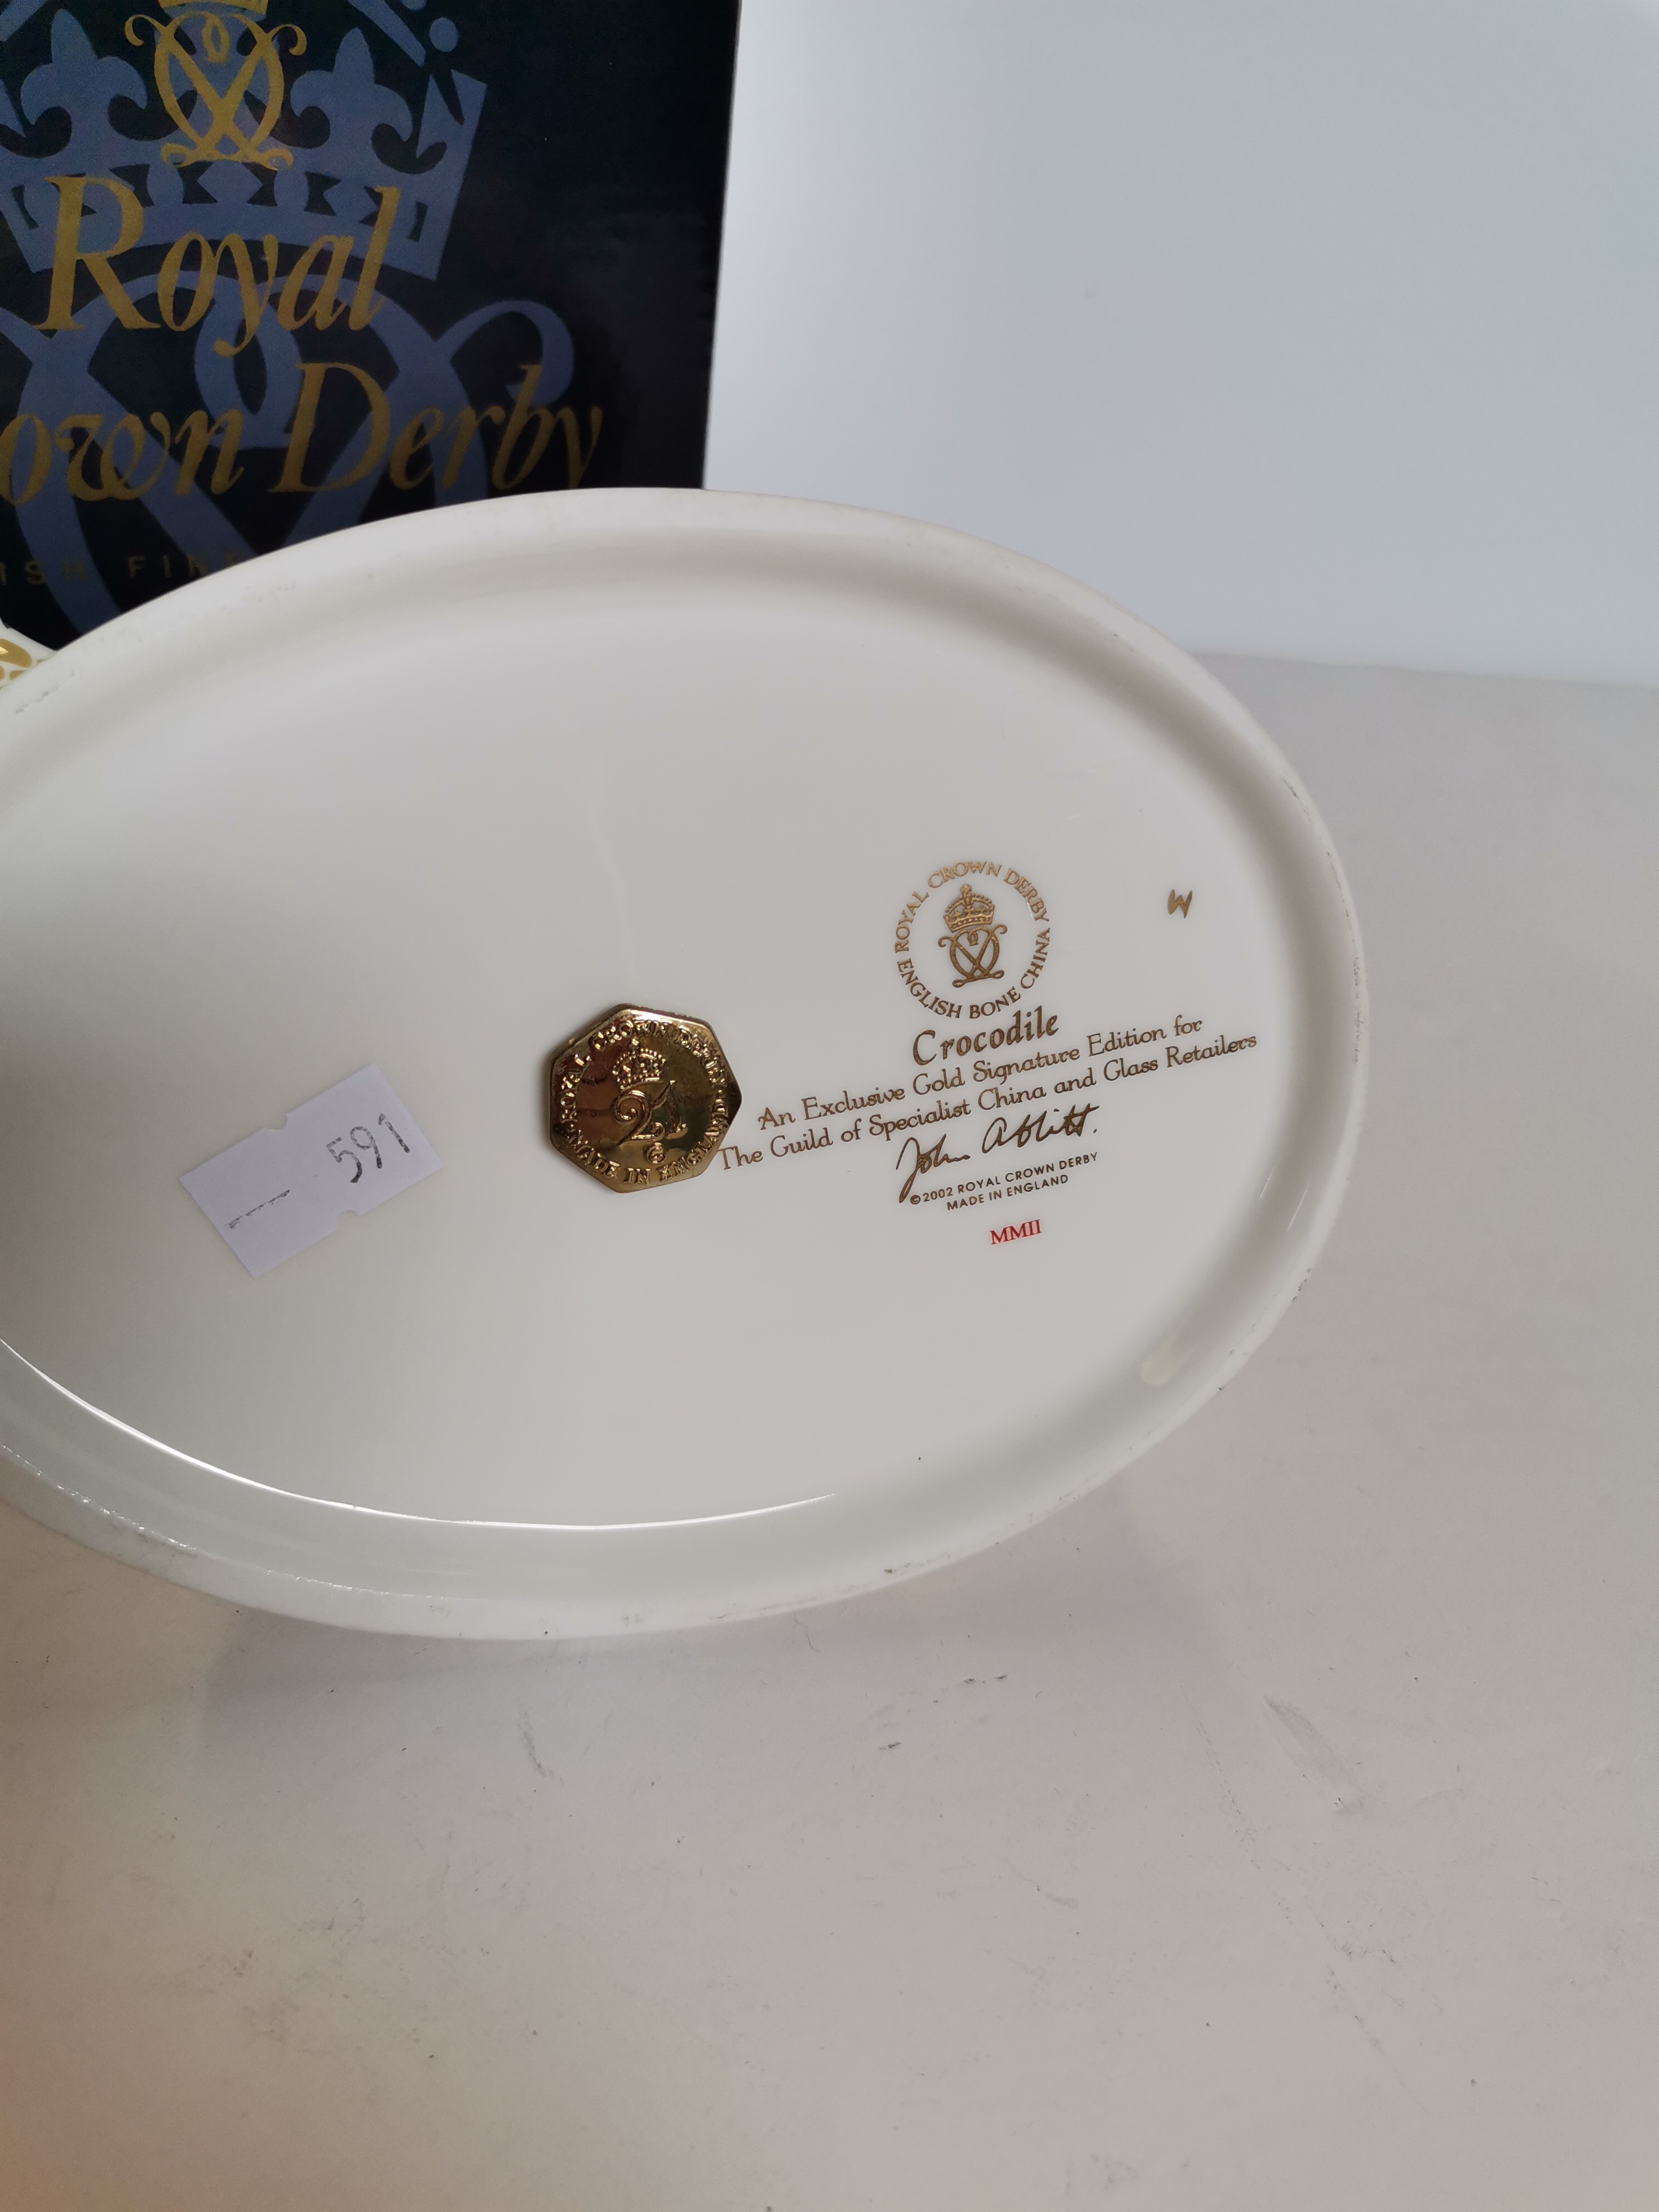 Royal Crown Derby Crocodile Paperweight, a Gold Signature Edition - Image 2 of 2